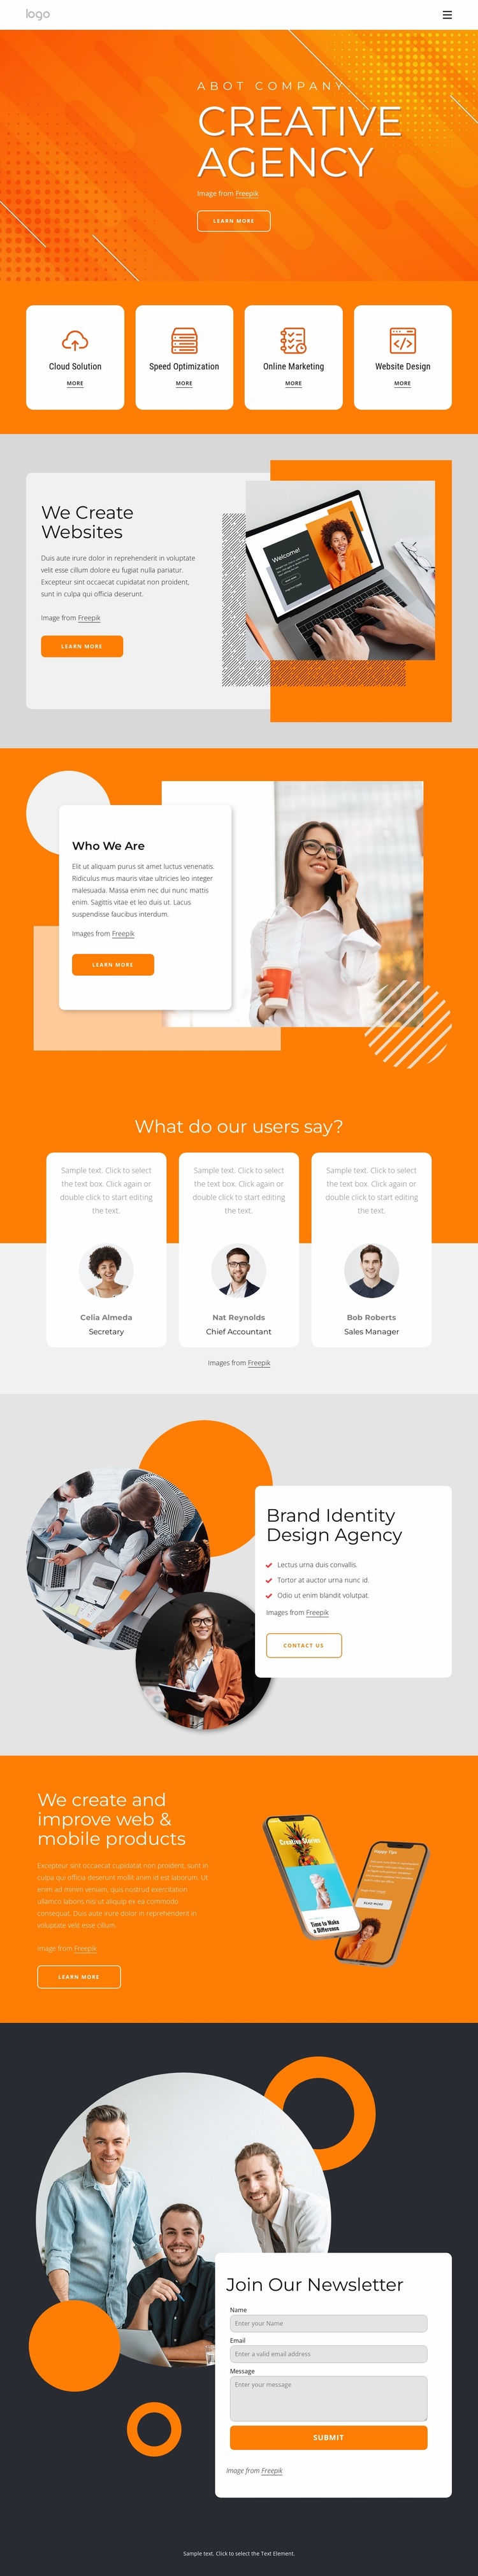 The creative agency for your next big thing Website Design